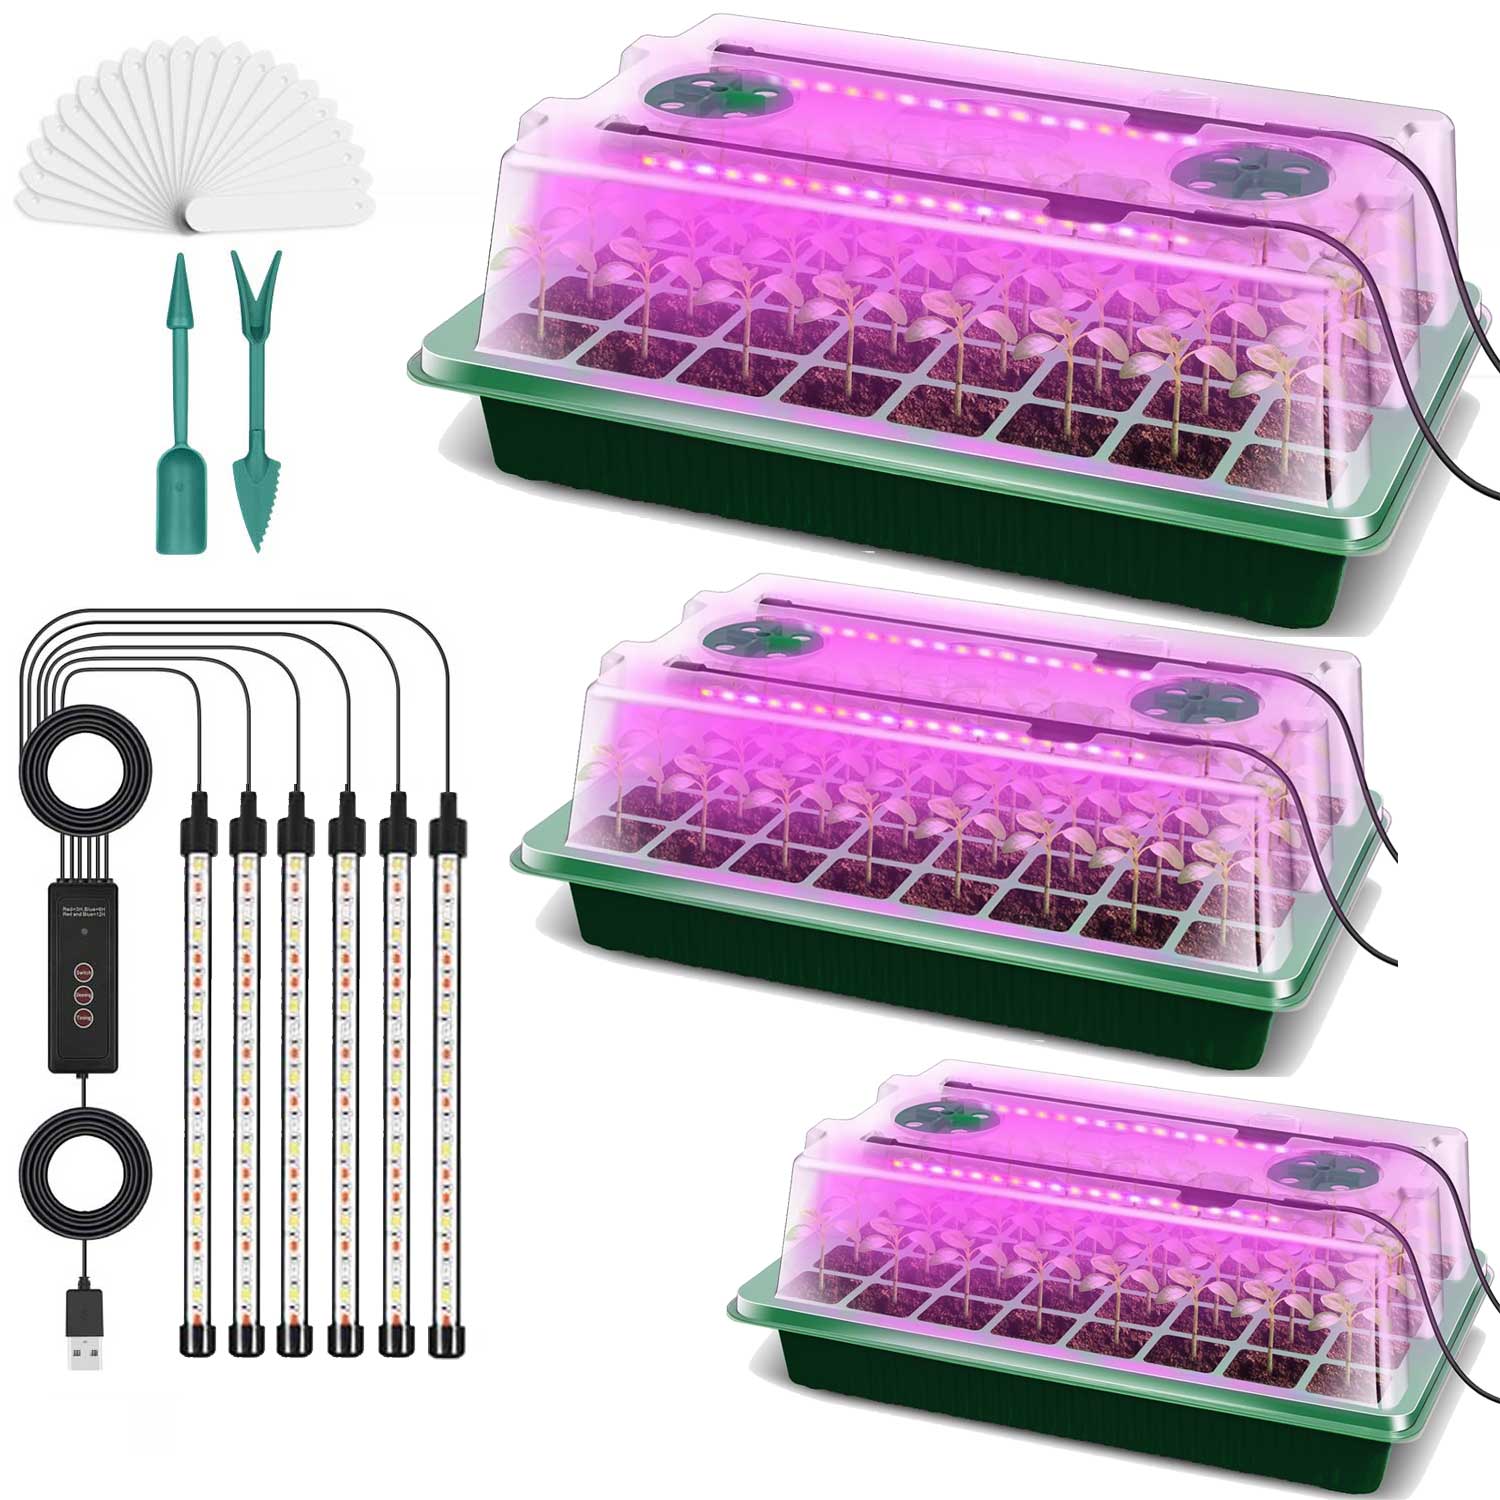 3 Packs Seed Starter Tray with Grow Light High Dome Seed Germination Kit 120 Cells with 6 LED Grow Lights Seedling Starter Kit with Smart Timer Red&Blue and Yellow Fullspectrum Growth Light